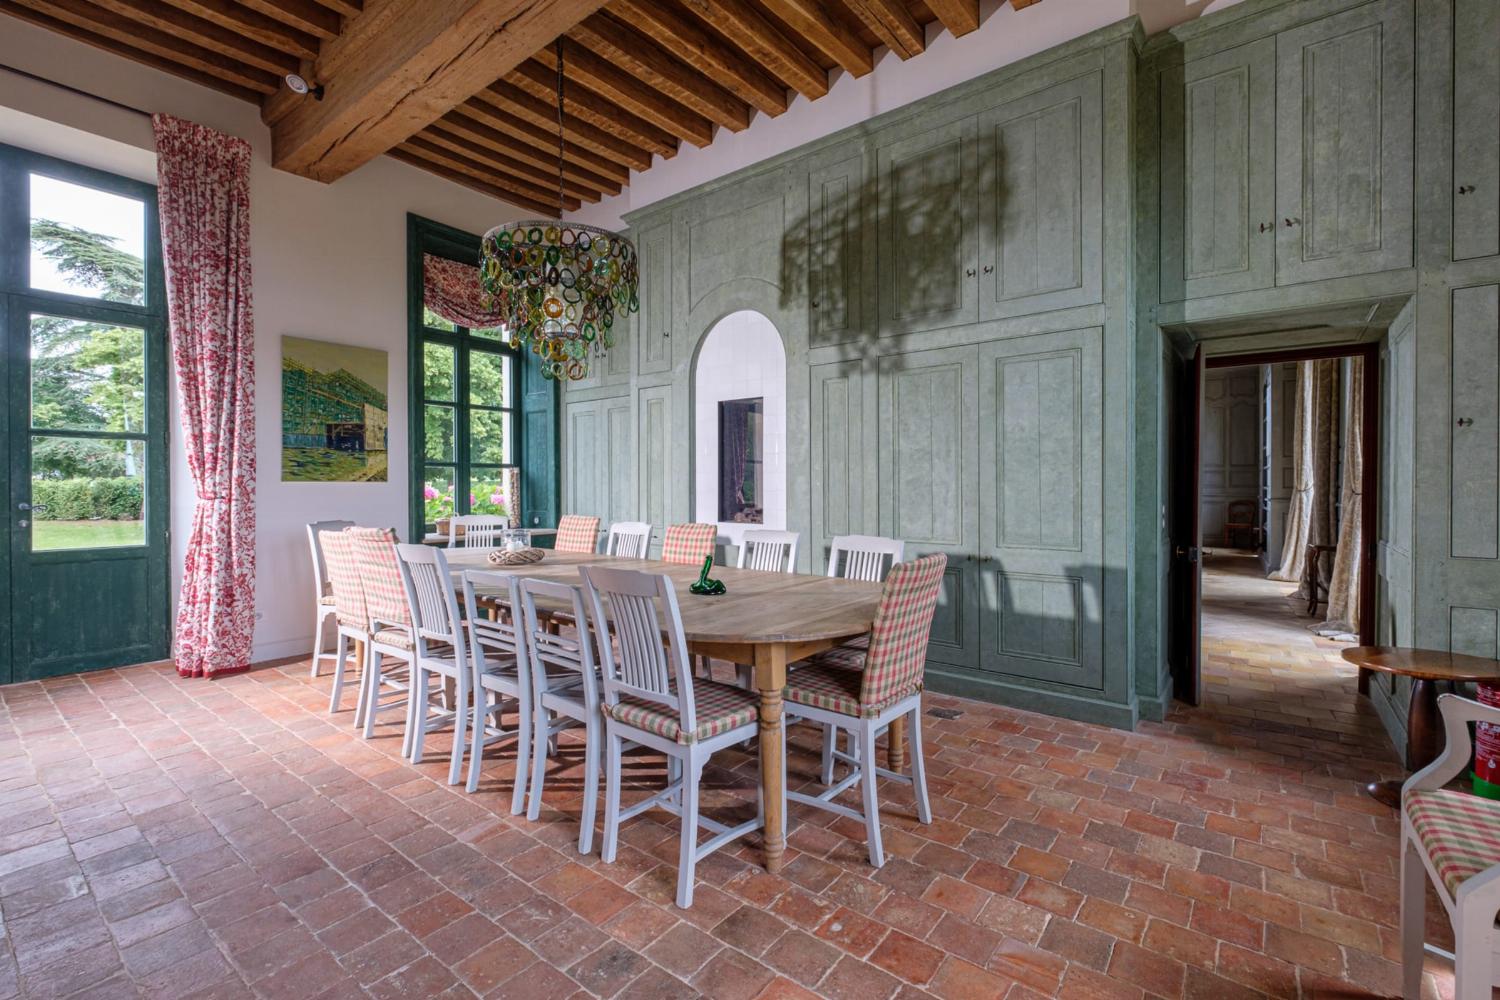 Dining room | Holiday château in Indre-et-Loire